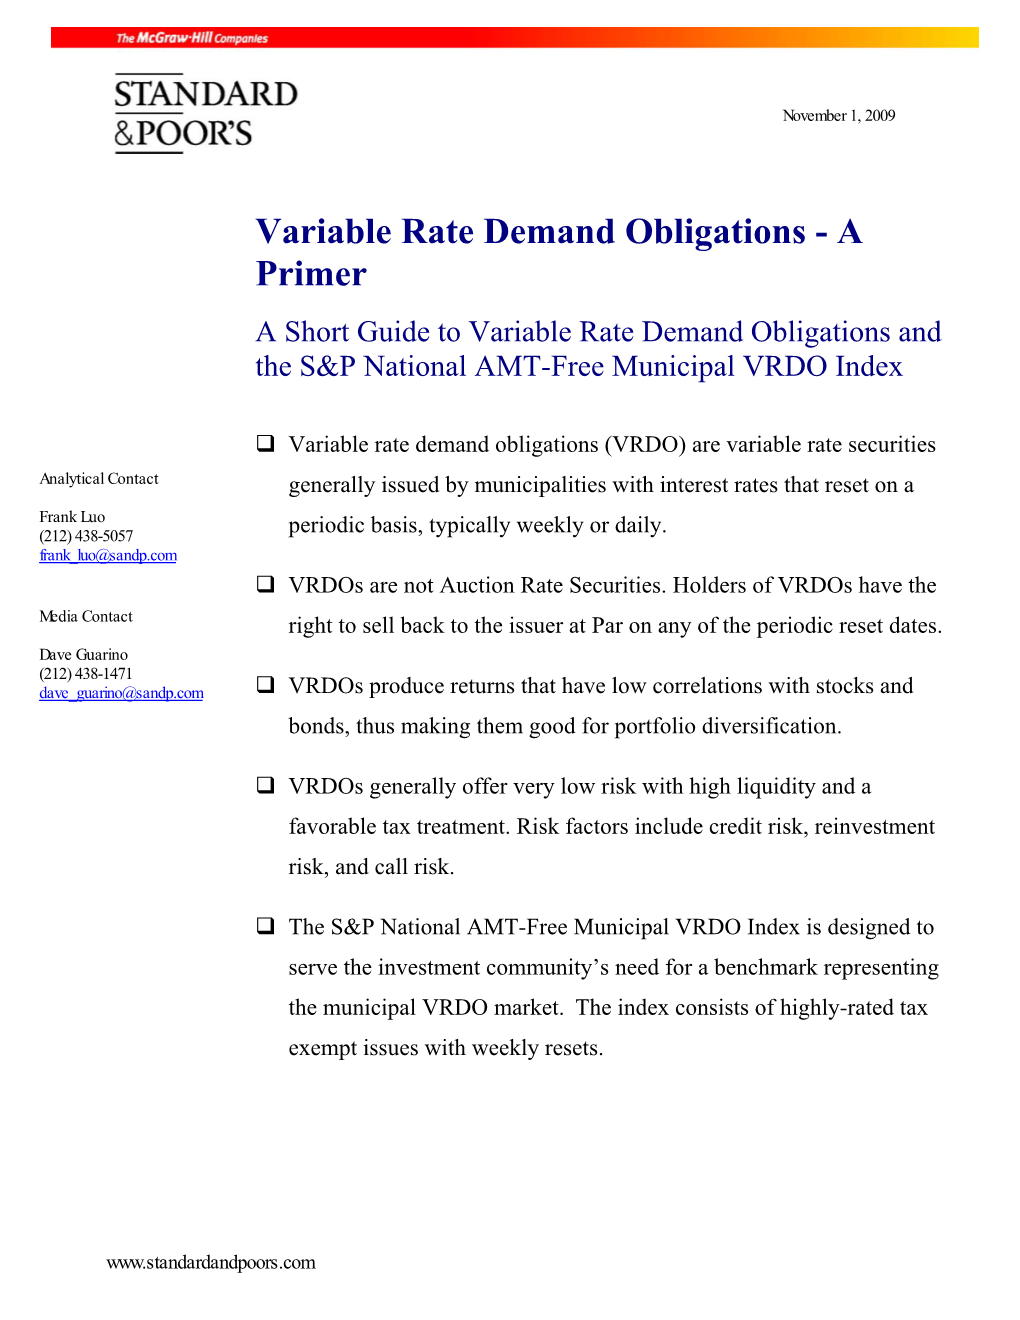 Variable Rate Demand Obligations - a Primer a Short Guide to Variable Rate Demand Obligations and the S&P National AMT-Free Municipal VRDO Index